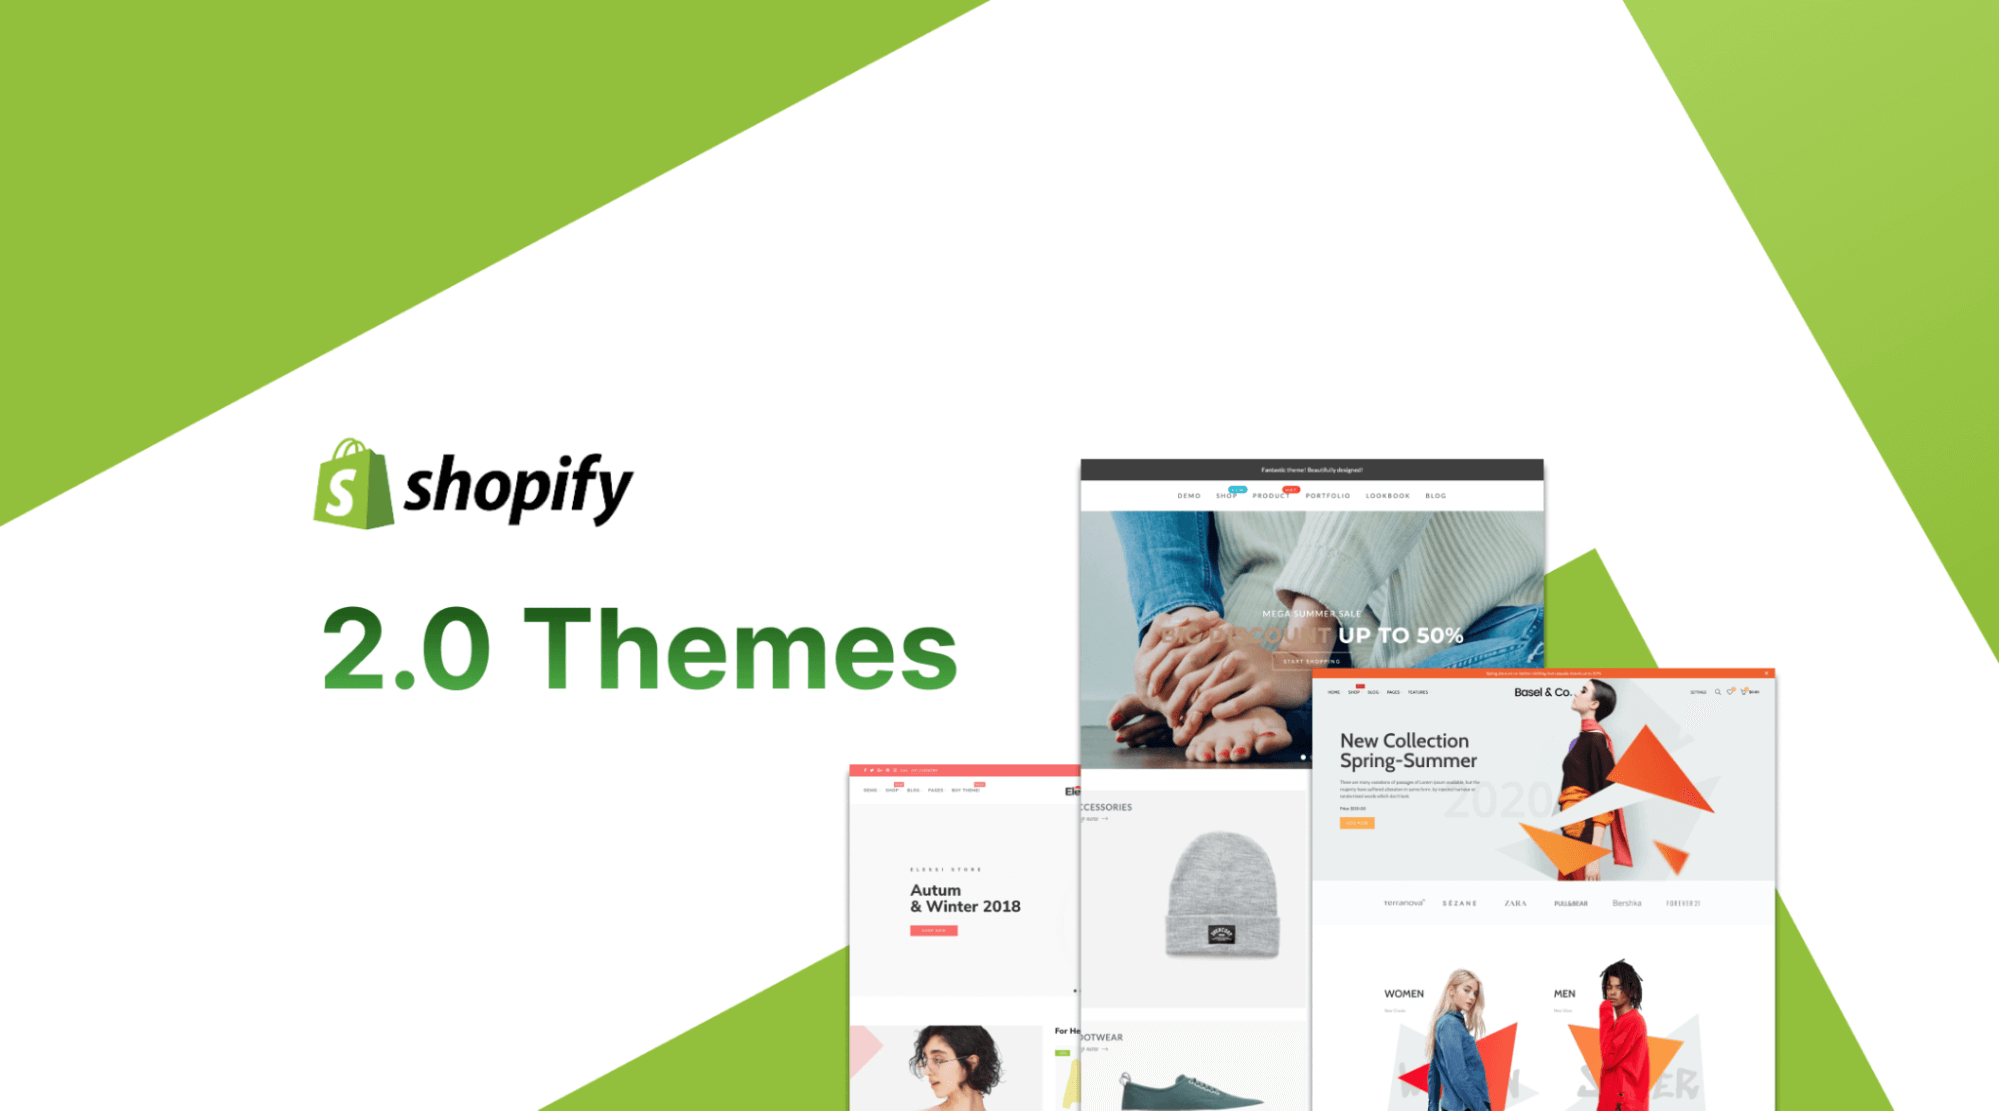 what is Shopify 2.0 themes